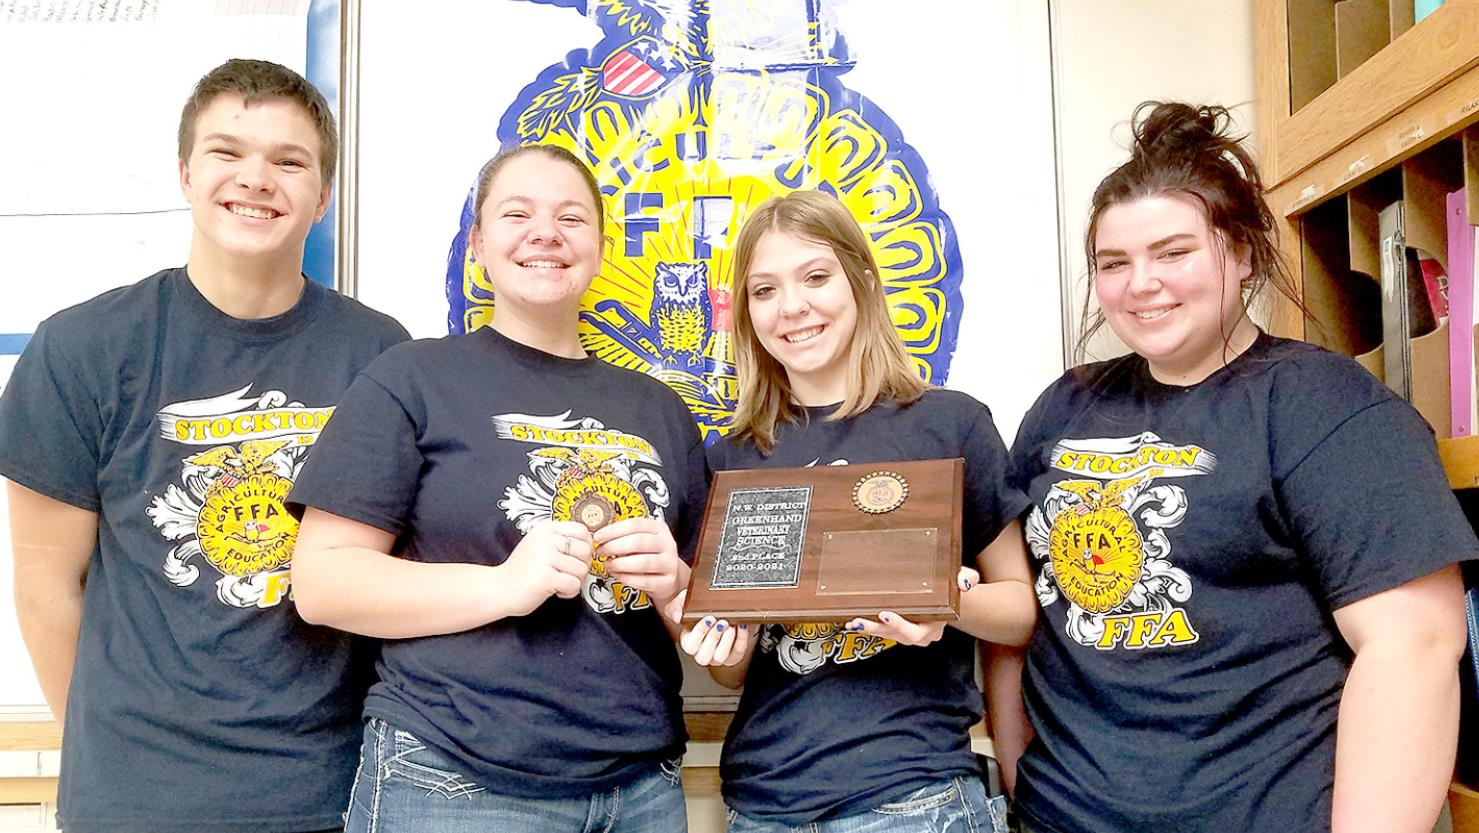 THE STOCKTON FFA GREENHAND TEAM of (from left) Zach Young, Cheyene Carlson, Kymberle LeiVan and Laci Green placed second in their division, with Cheyene Carlson placing 8th individually.